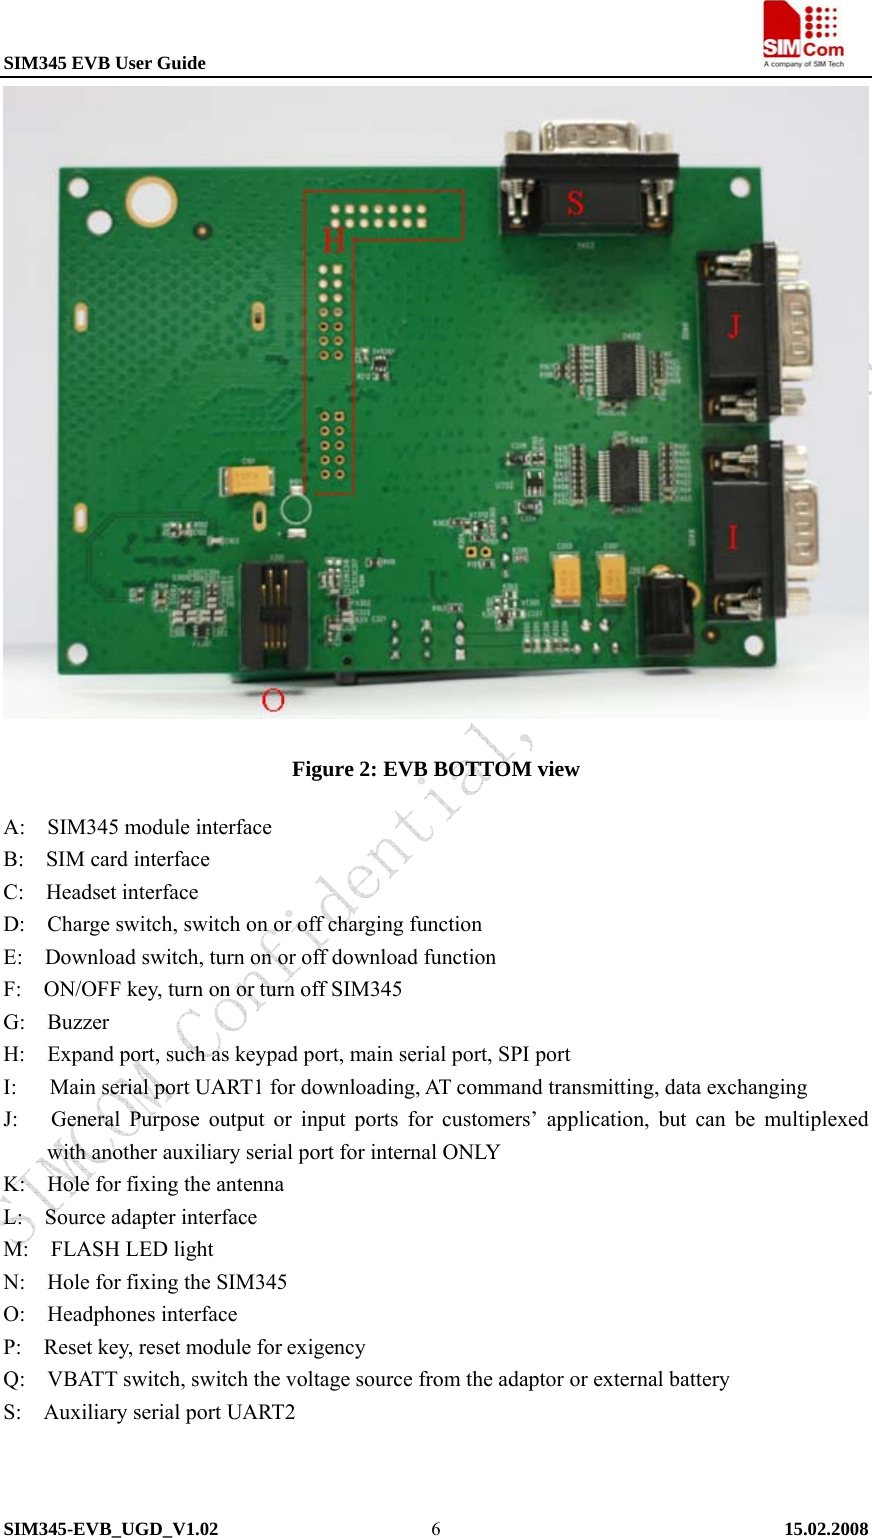 SIM345 EVB User Guide                                                             SIM345-EVB_UGD_V1.02   15.02.2008   6 Figure 2: EVB BOTTOM view A:  SIM345 module interface B:    SIM card interface C:  Headset interface D:    Charge switch, switch on or off charging function E:    Download switch, turn on or off download function F:    ON/OFF key, turn on or turn off SIM345 G:  Buzzer H:    Expand port, such as keypad port, main serial port, SPI port   I:      Main serial port UART1 for downloading, AT command transmitting, data exchanging J:   General Purpose output or input ports for customers’ application, but can be multiplexed with another auxiliary serial port for internal ONLY K:  Hole for fixing the antenna L:  Source adapter interface M:    FLASH LED light N:  Hole for fixing the SIM345 O:  Headphones interface P:    Reset key, reset module for exigency  Q:    VBATT switch, switch the voltage source from the adaptor or external battery S:    Auxiliary serial port UART2 